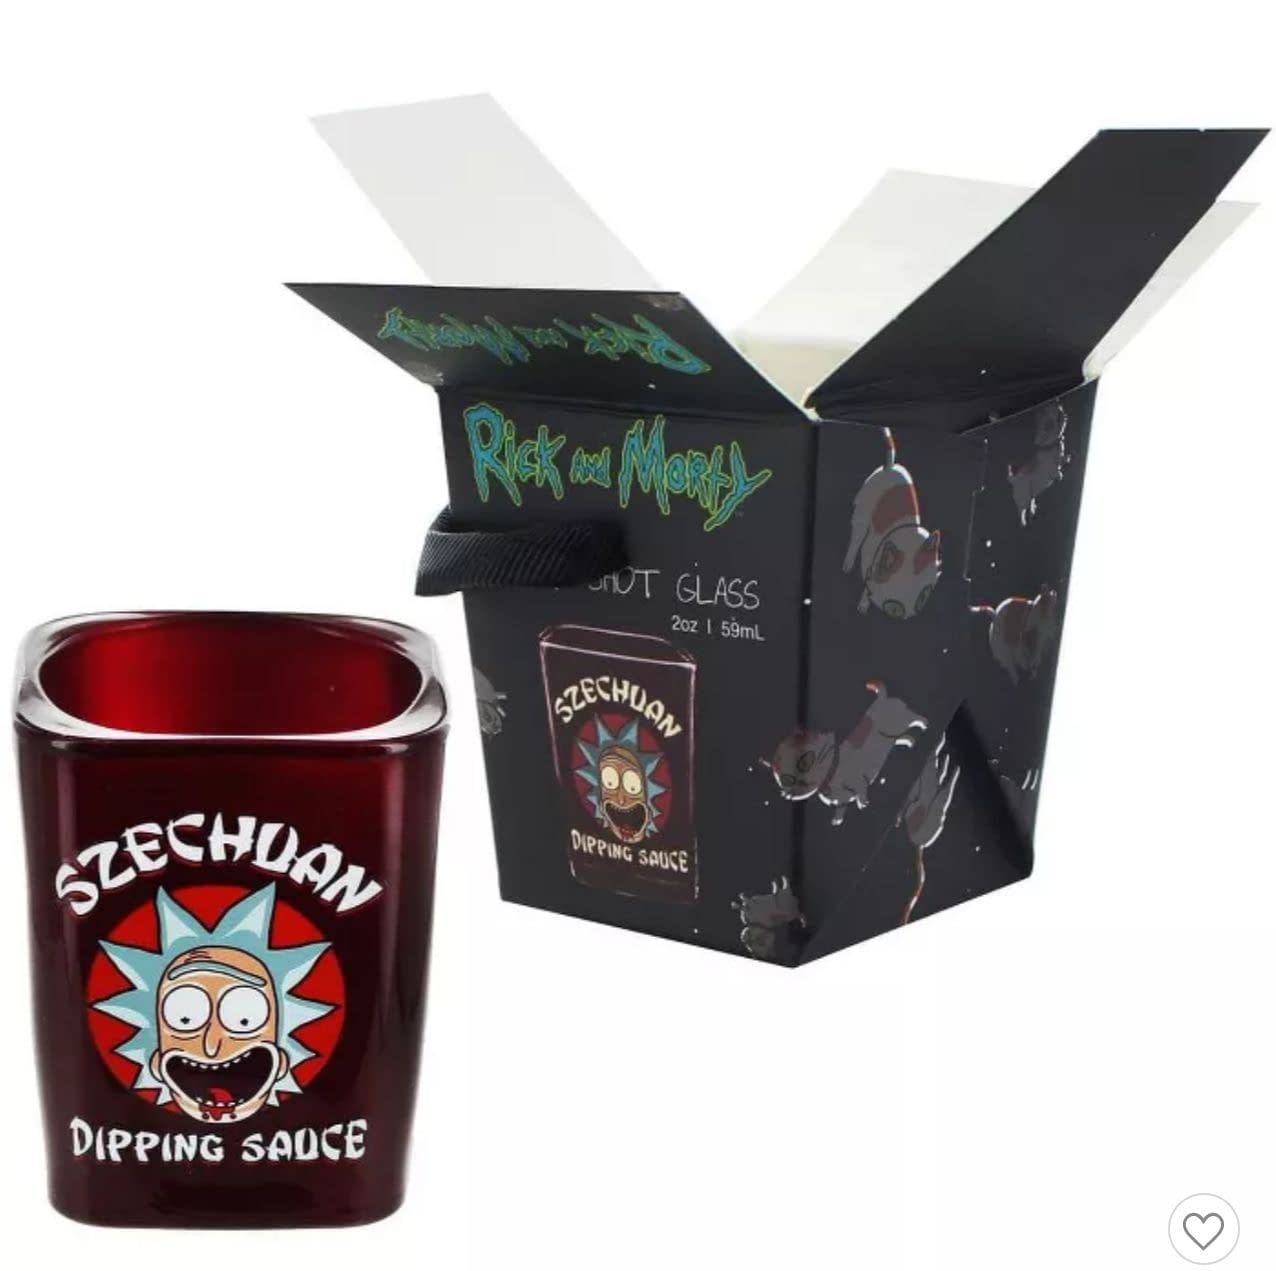 Oh geez Rick, not another gift guide!